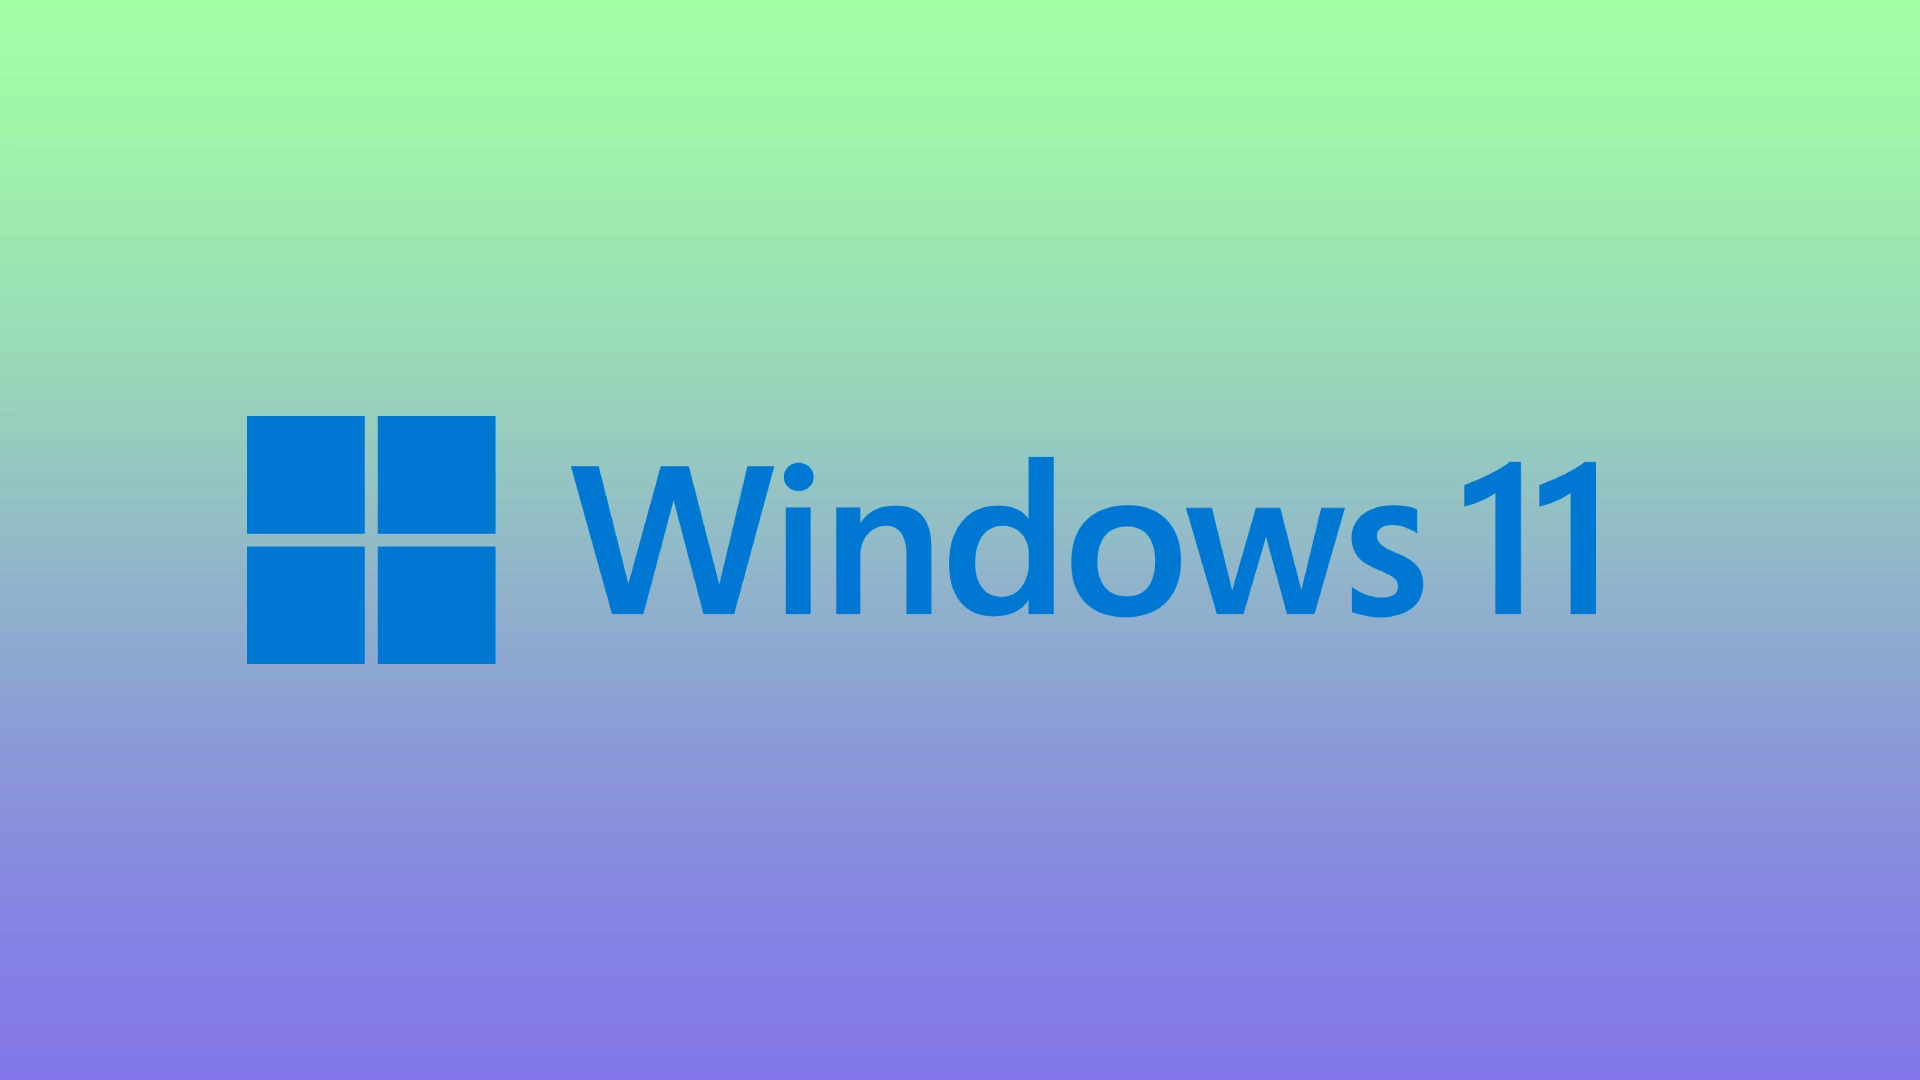 Microsoft confirmed that the latest update for Windows 11 reduces performance